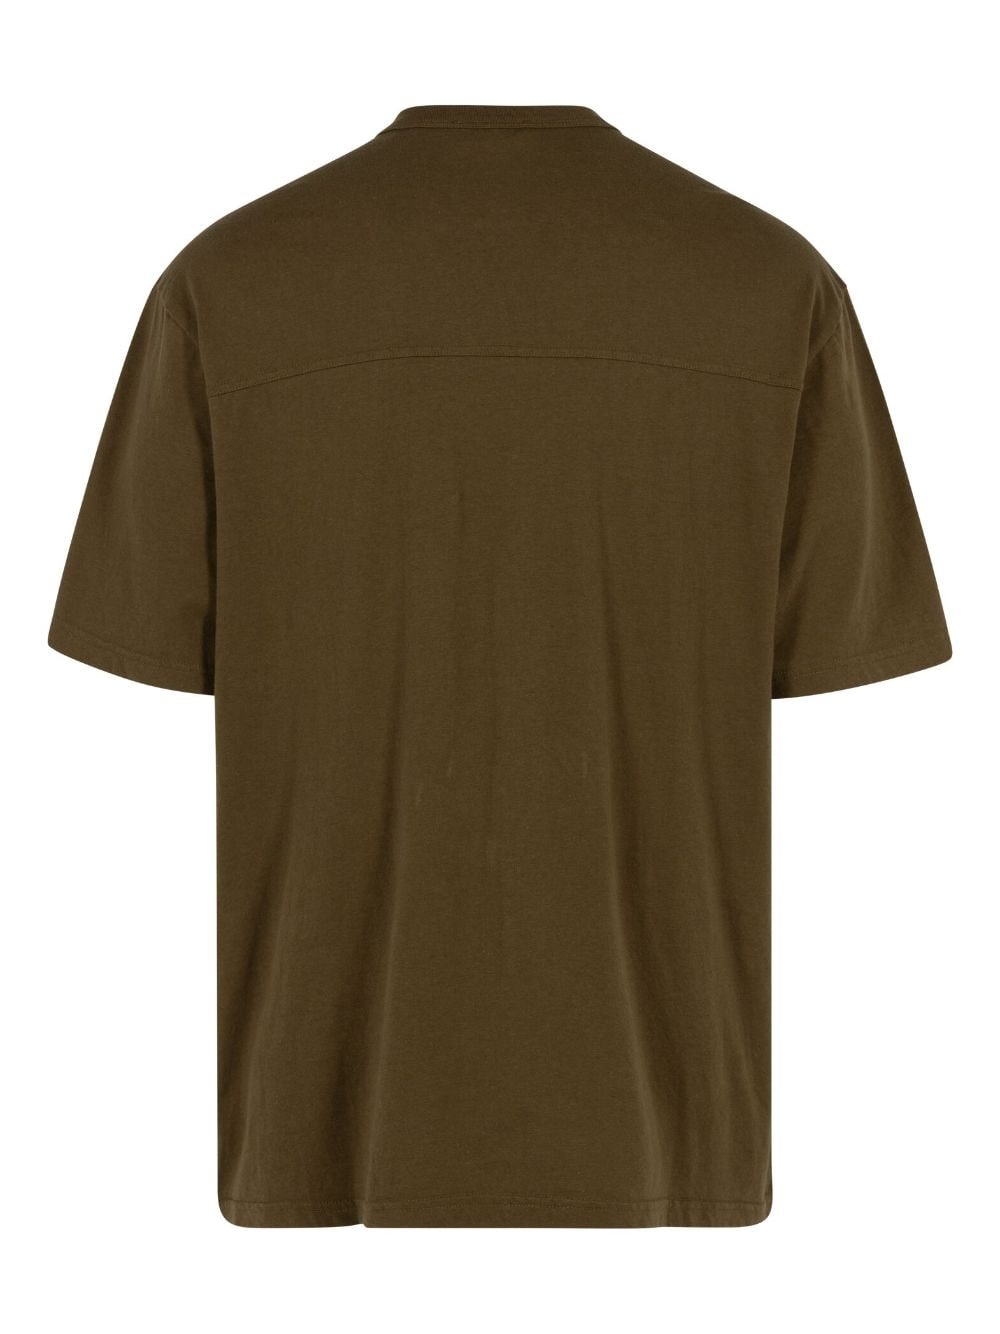 Undercover Football "Olive" T-shirt - 3